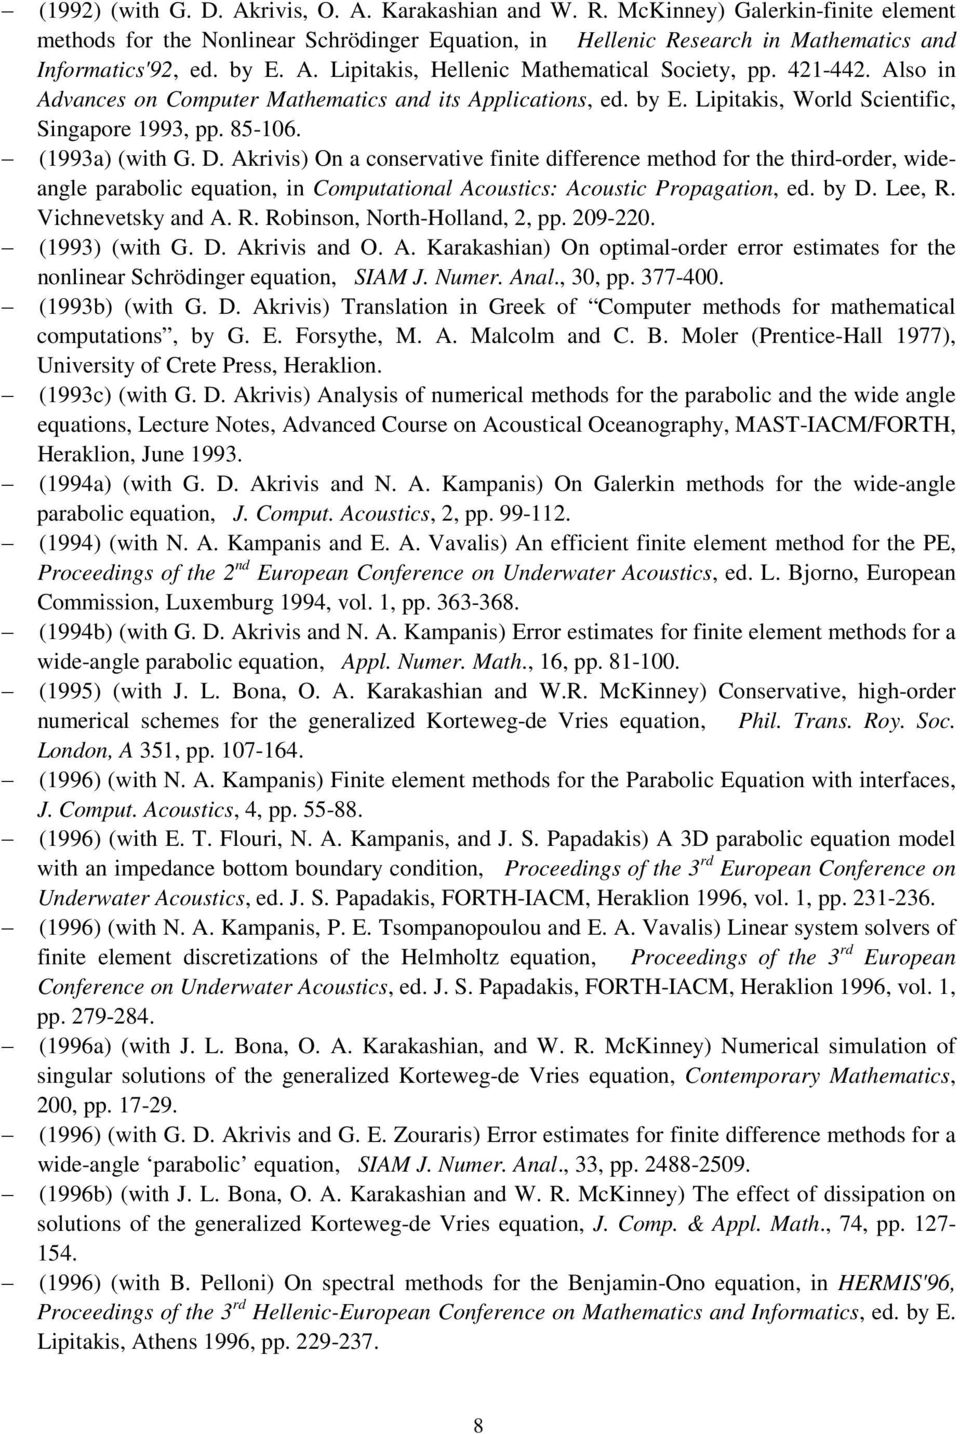 (1993a) (with G. D. Akrivis) On a conservative finite difference method for the third-order, wideangle parabolic equation, in Computational Acoustics: Acoustic Propagation, ed. by D. Lee, R.